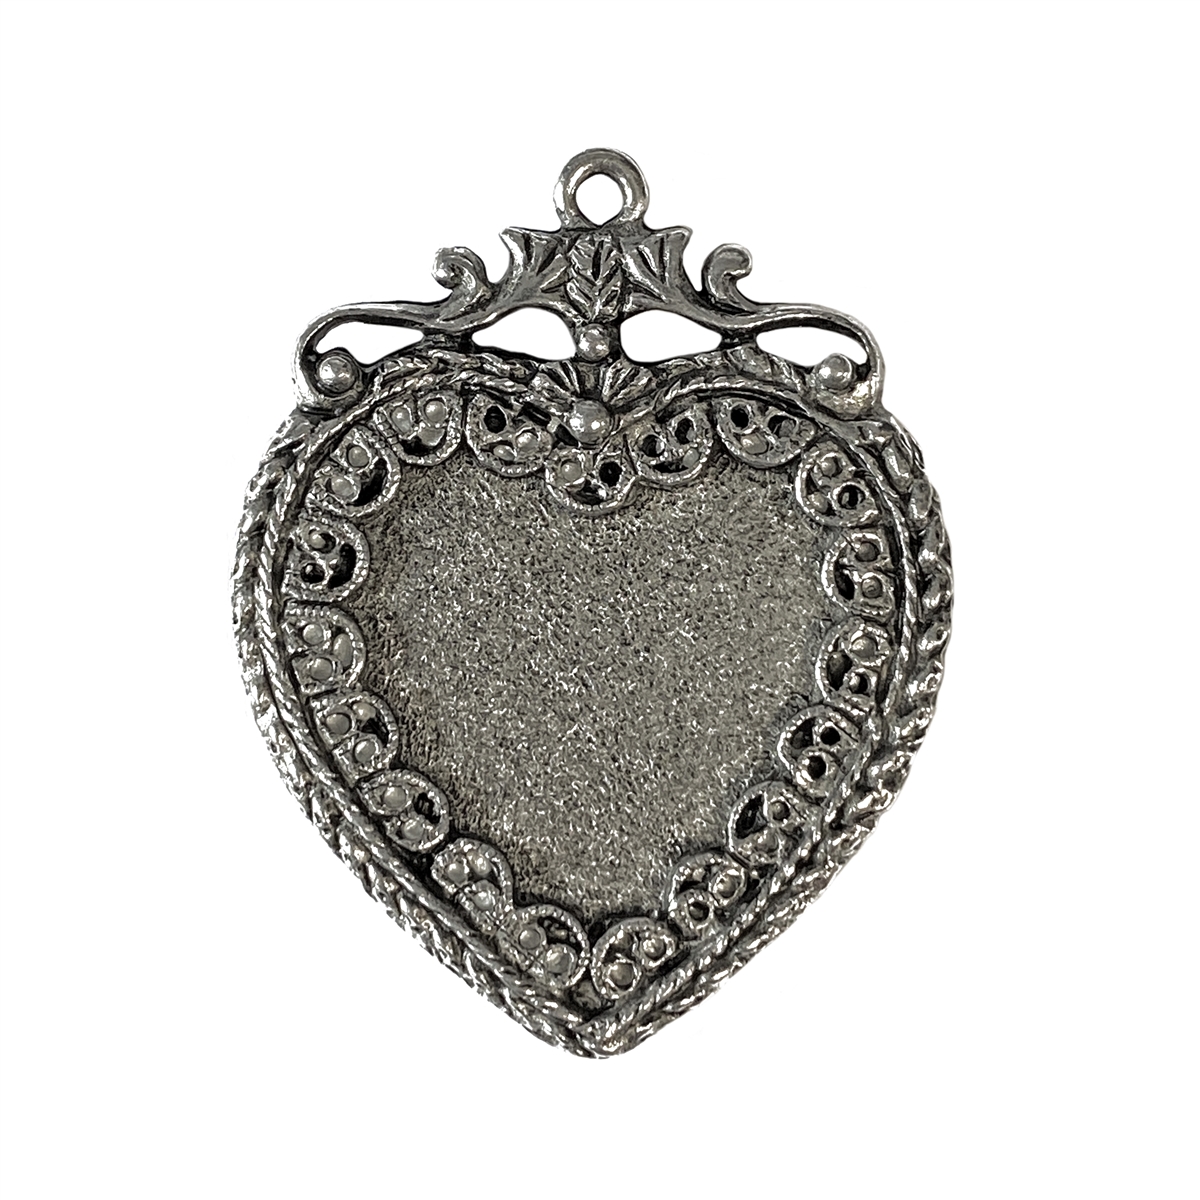 HEART TO RUN Round Pewter Charm - 1/2 inch Round Pewter Charm